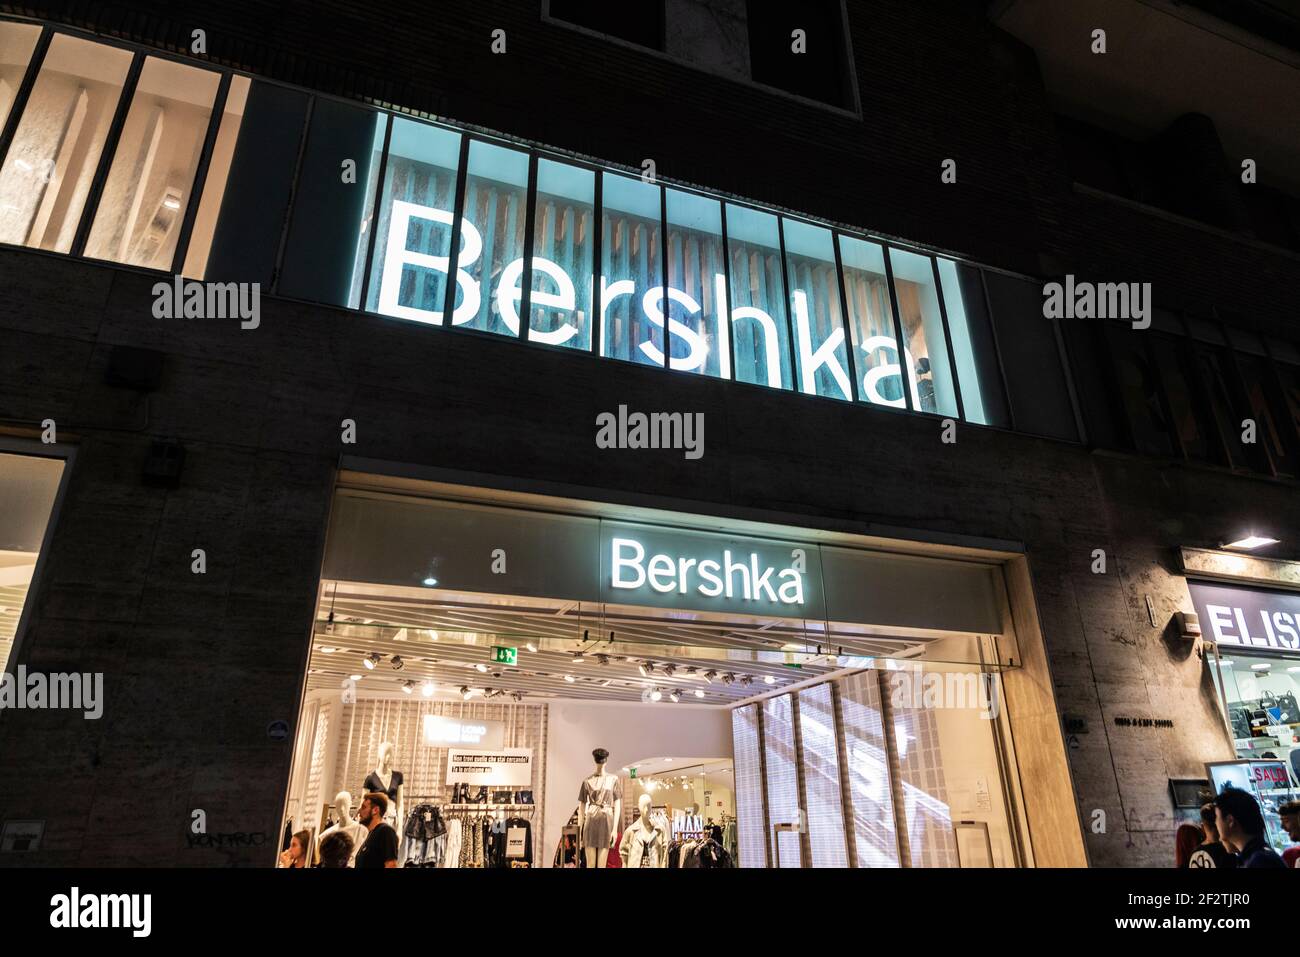 Naples, Italy - September 9, 2019: Facade of a Bershka clothing store at night with people around in Via Toledo, shopping street in Naples, Italy Stock Photo